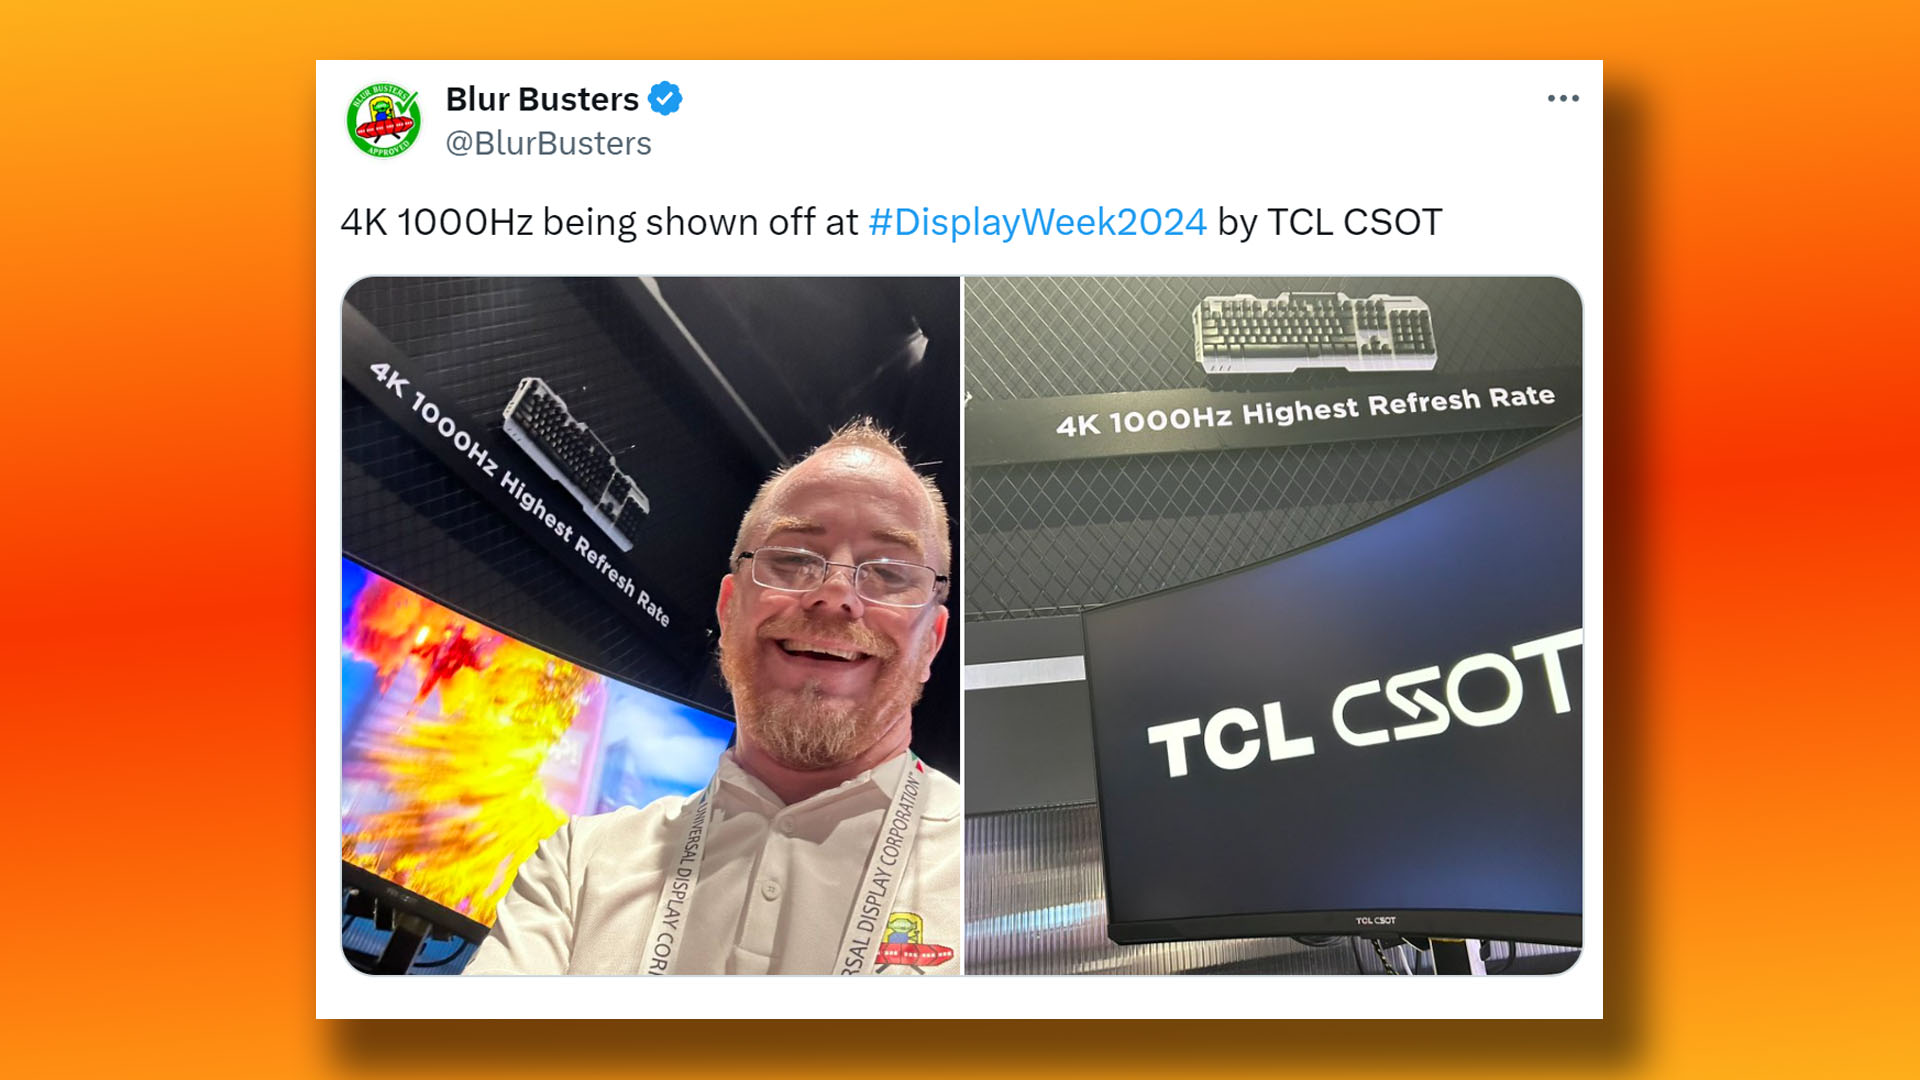 TCL CSOT 1,000Hz gaming monitor spotted by Blur Busters in Twitter X post